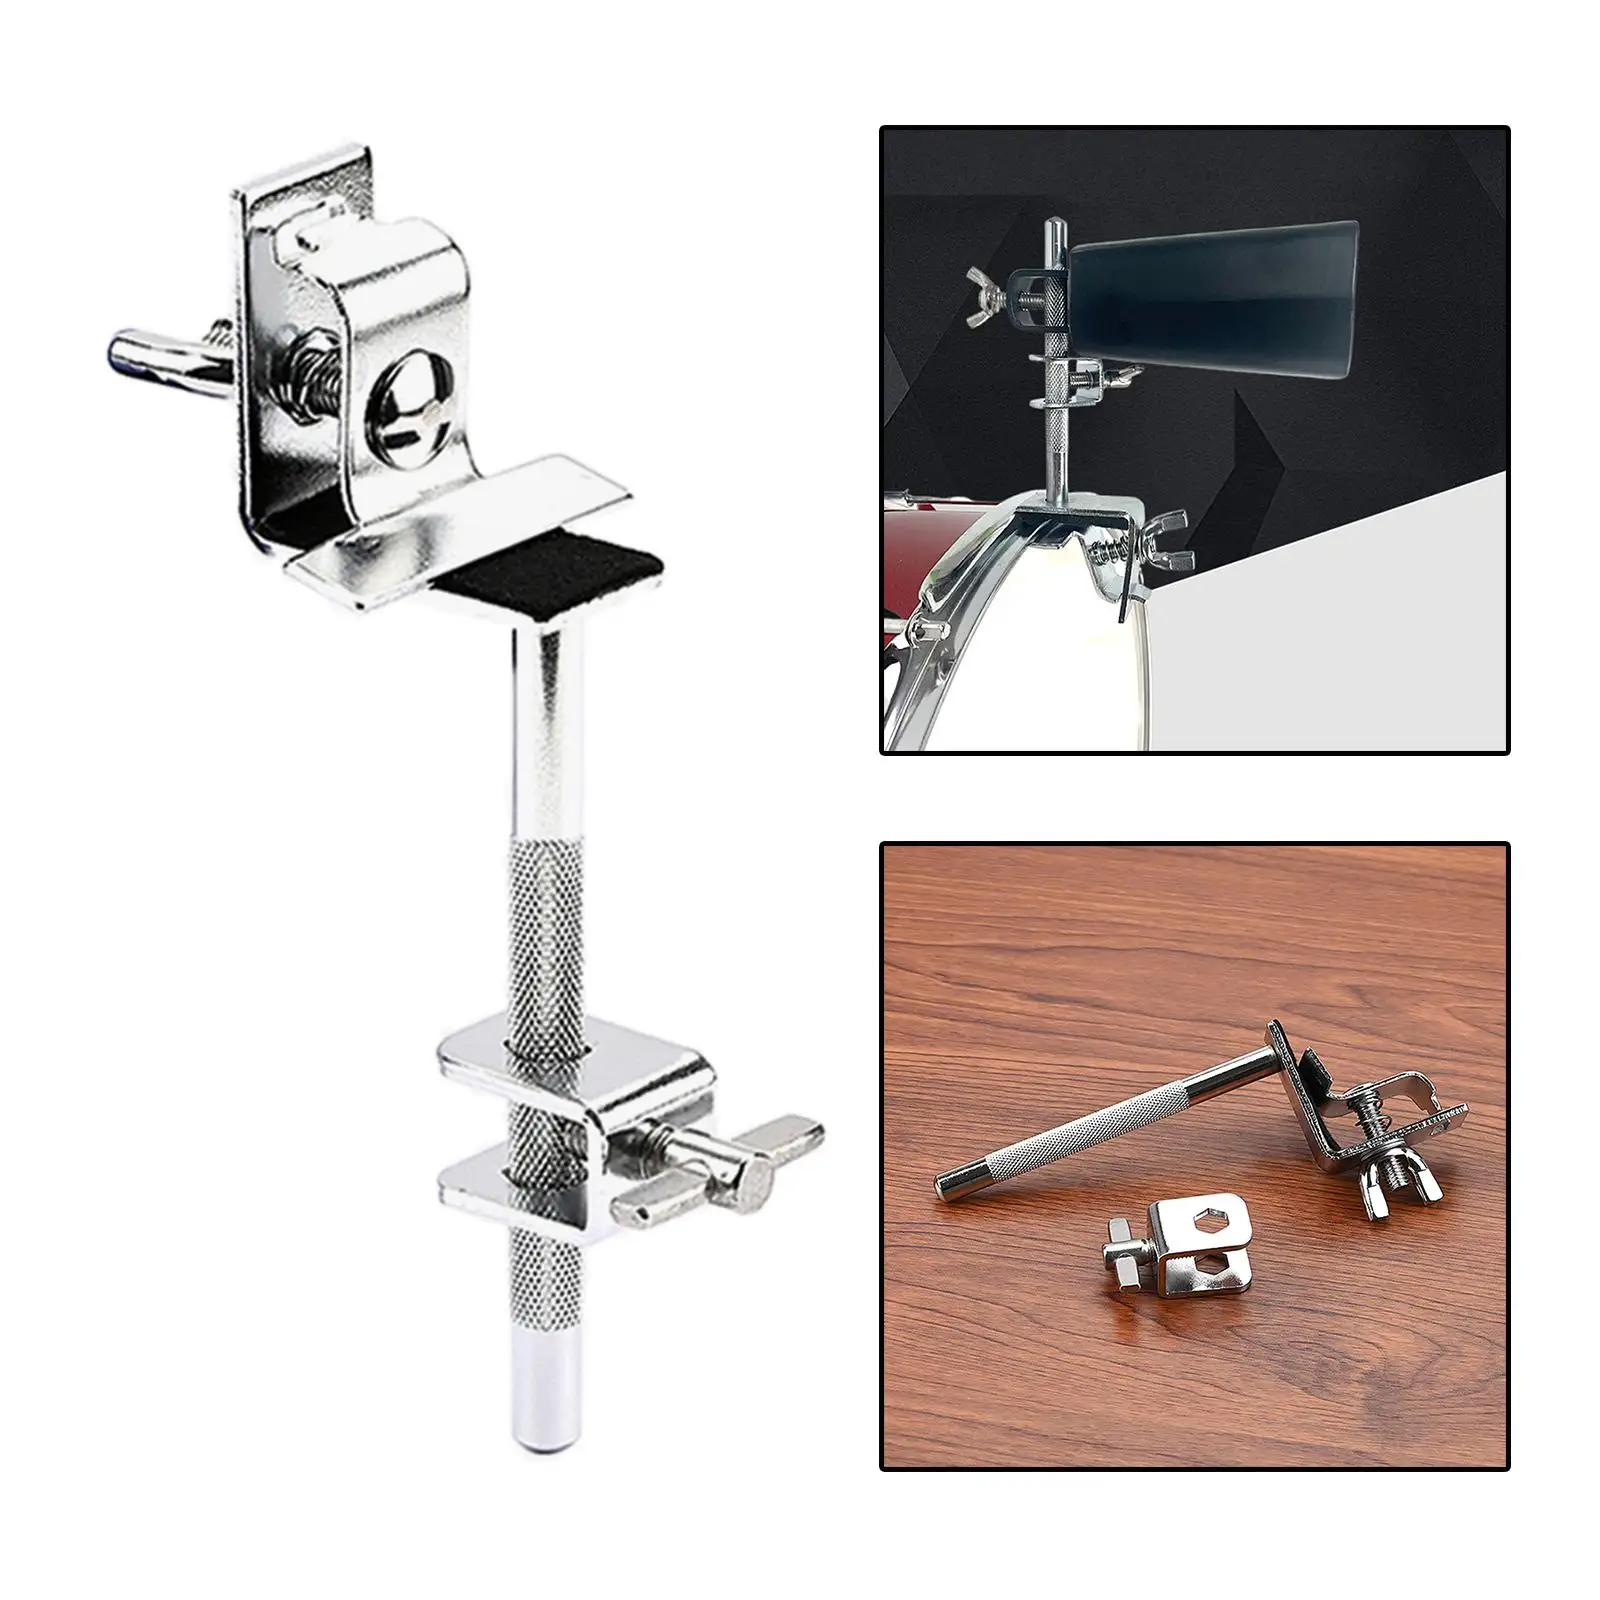 Portable Cowbell Holder Instrument Accessories Silver Durable Mounting Clamps Metal up or Down Adjustable for Beginner